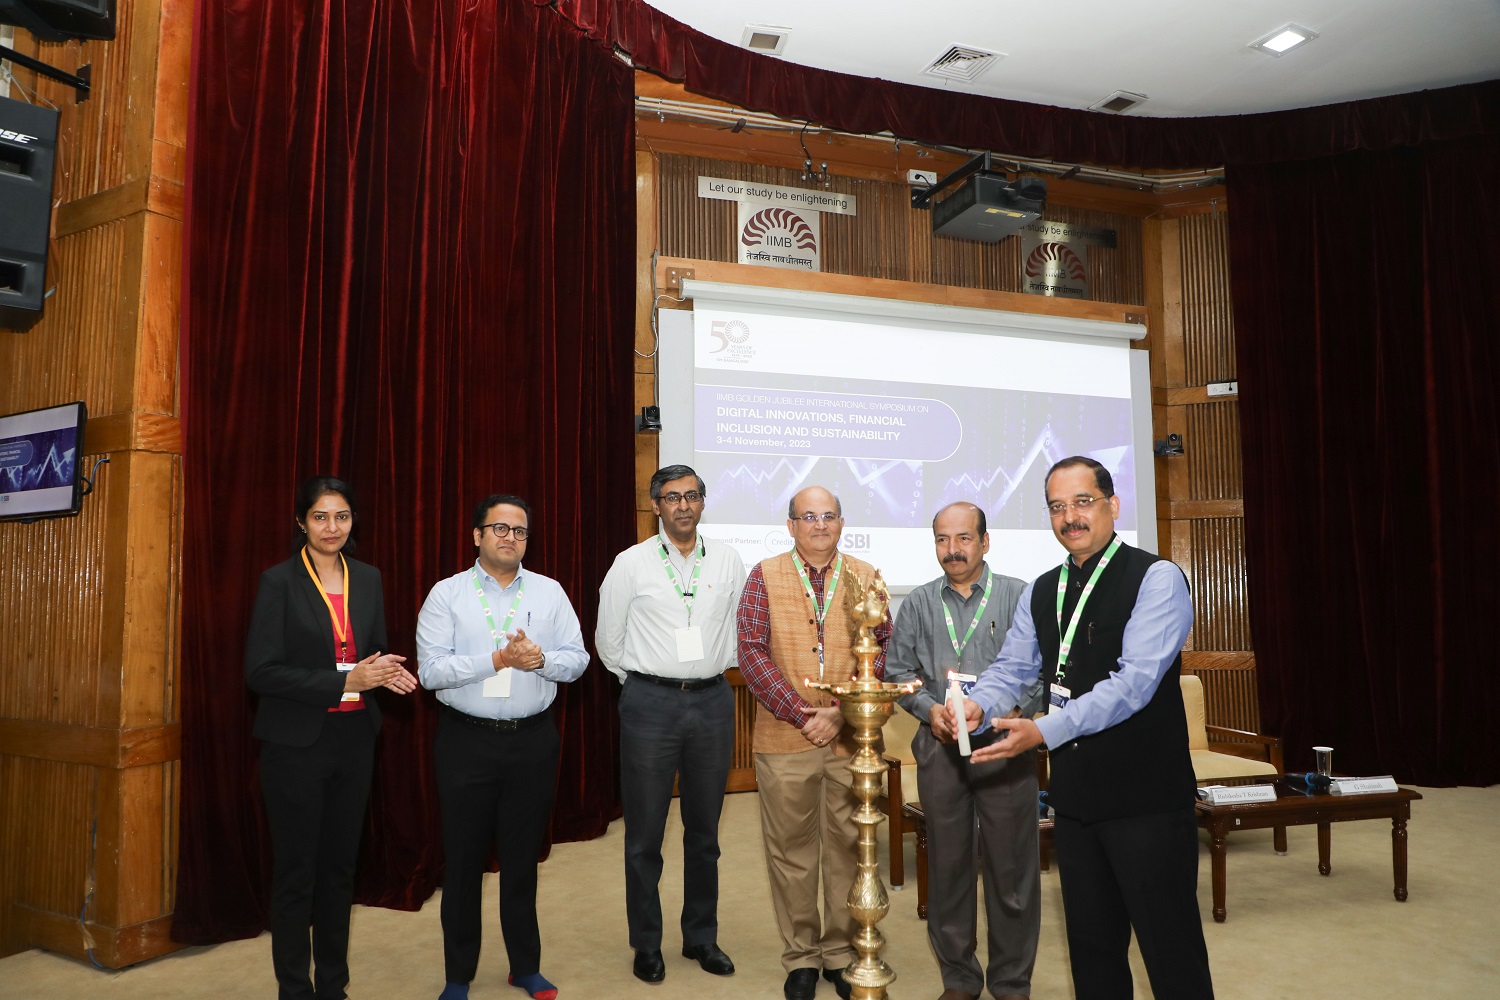 The Executive Education Programme office at IIMB hosted an International Symposium on ‘Digital Innovations, Financial Inclusion, and Sustainability’, on 3rd & 4th November 2023.